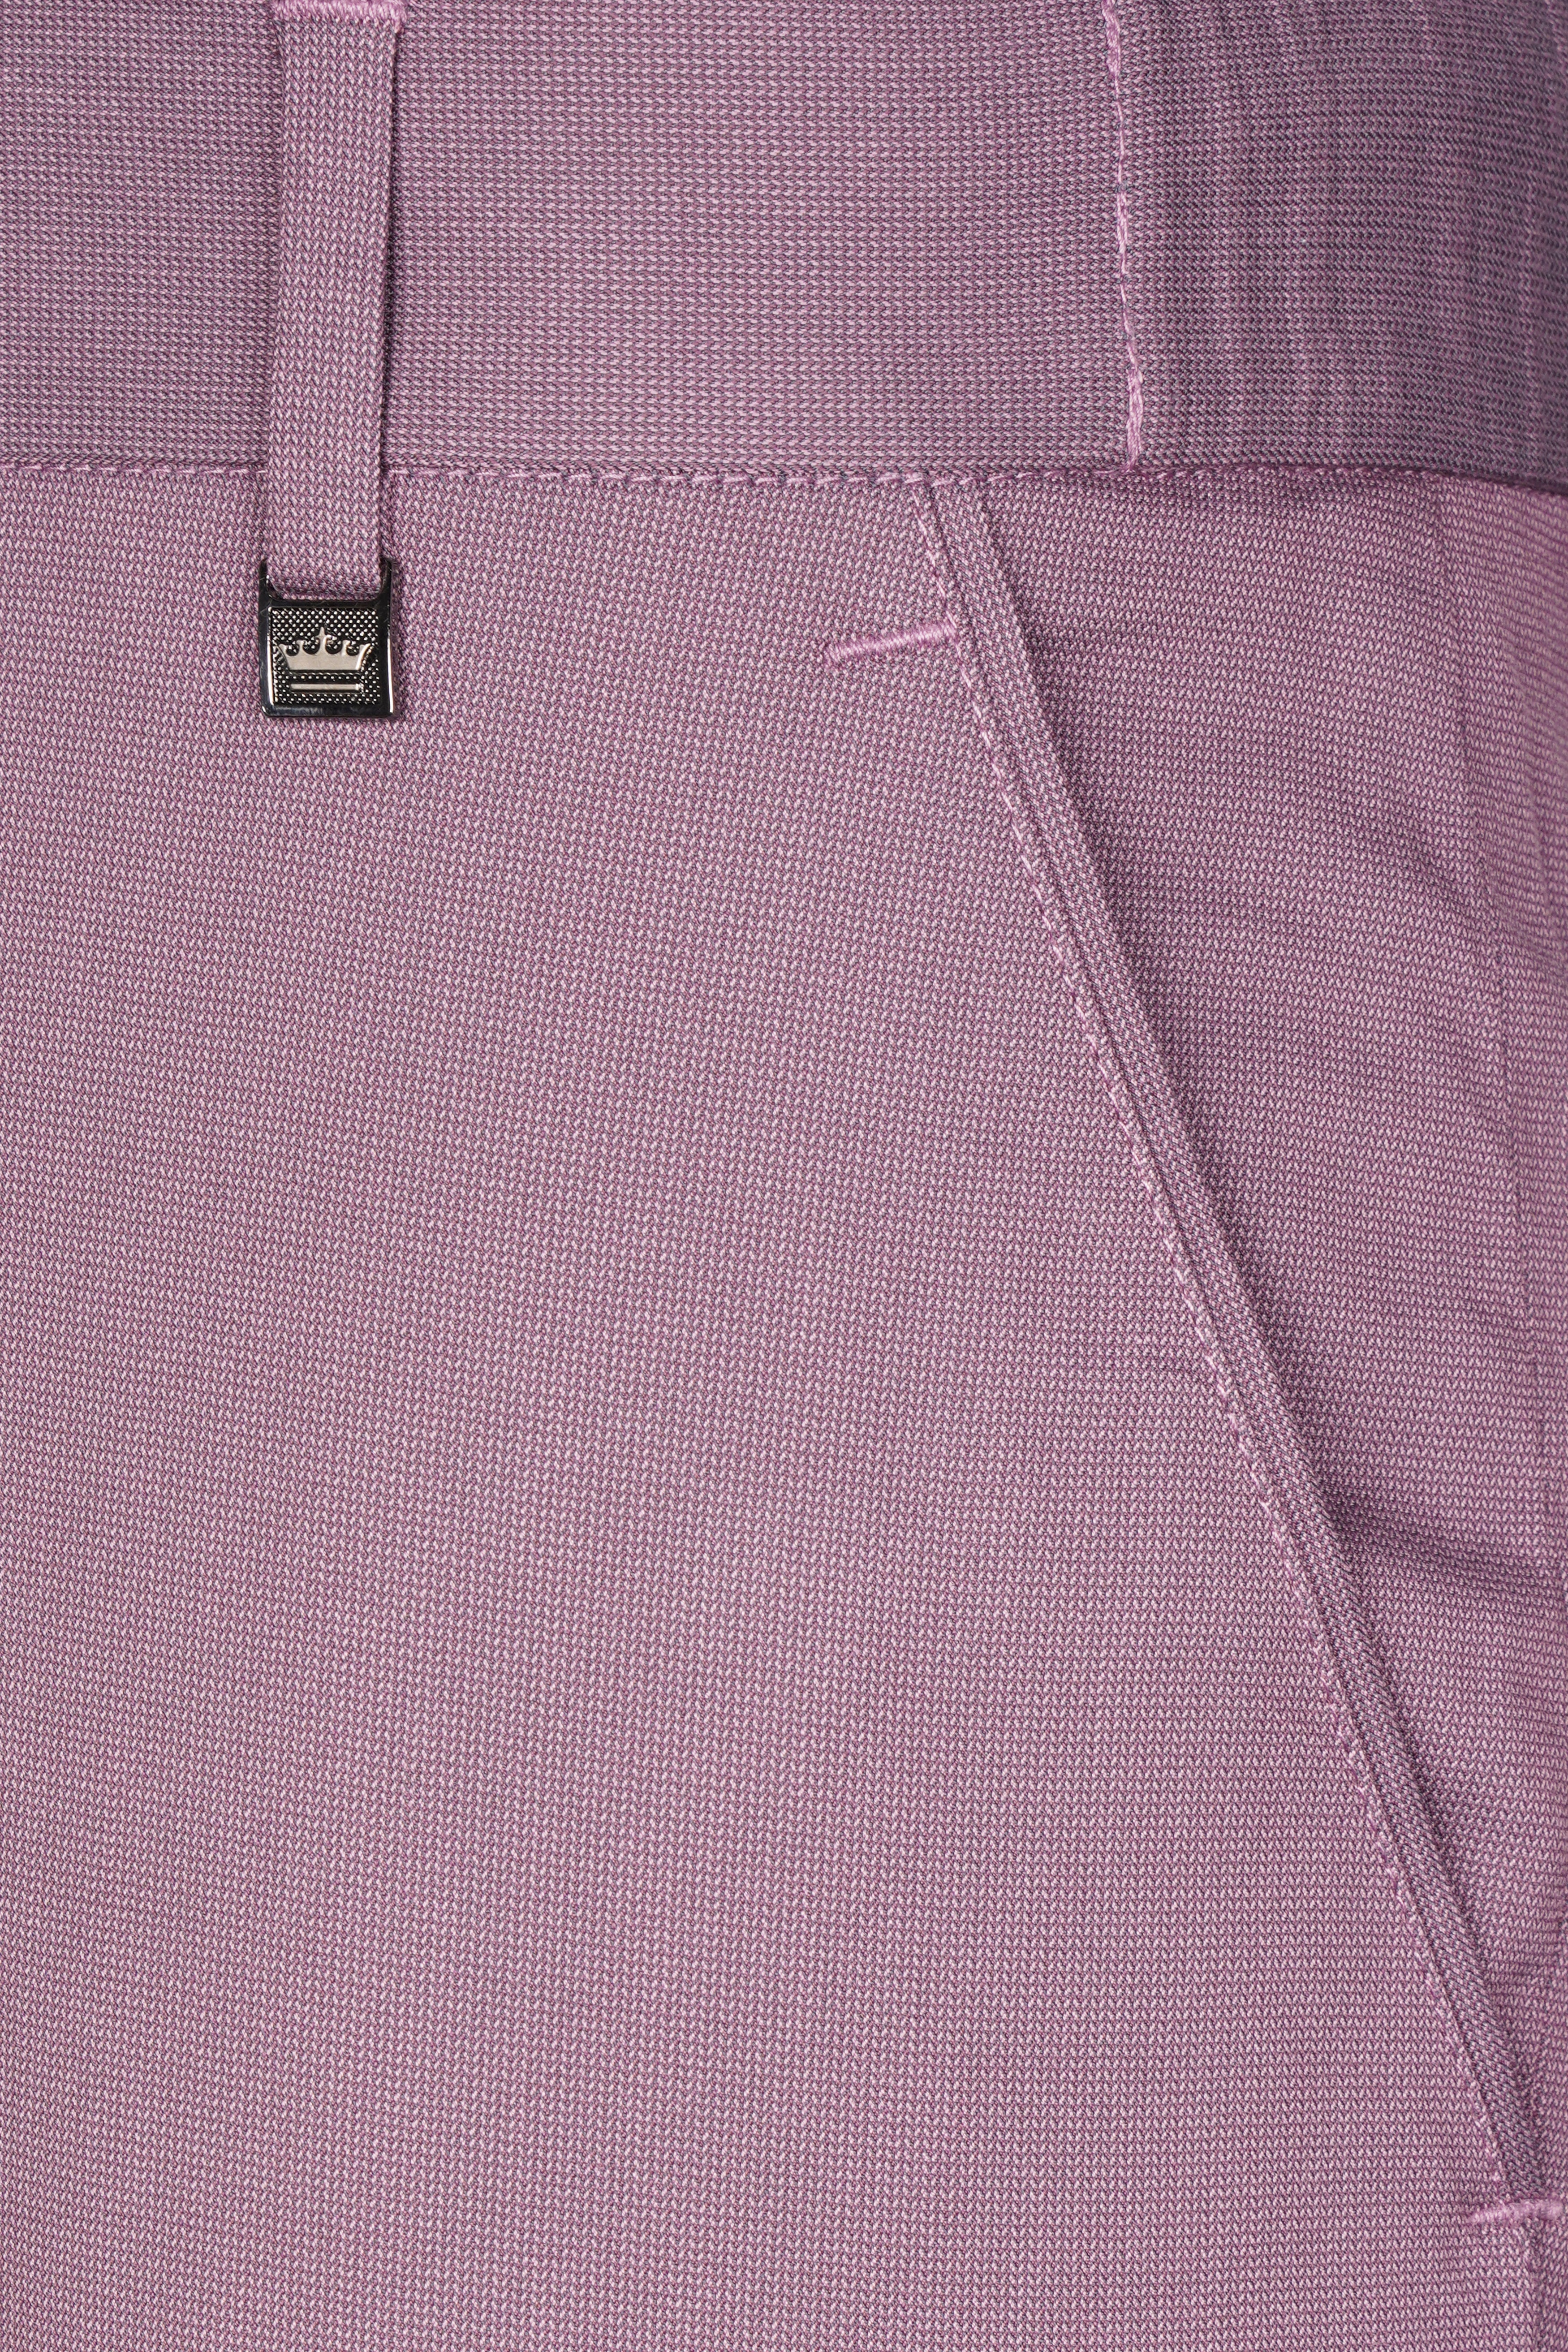 Orchid Lavender Stretchable Waistband Premium Cotton Pant T3071-SW-28, T3071-SW-30, T3071-SW-32, T3071-SW-34, T3071-SW-36, T3071-SW-38, T3071-SW-40, T3071-SW-42, T3071-SW-44